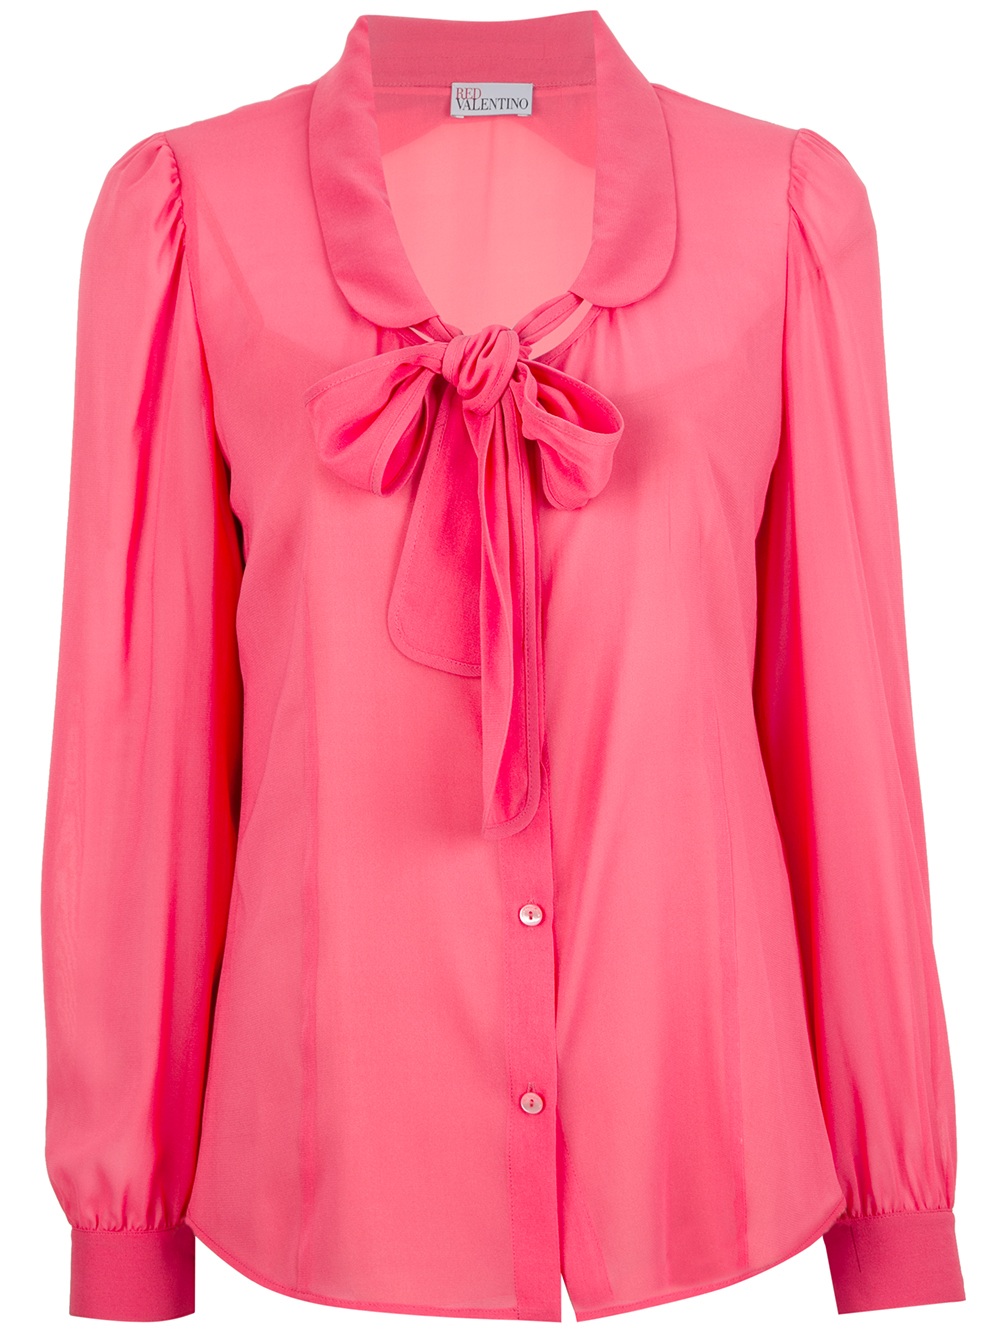 Lyst - Red Valentino Pussy Bow Blouse in Pink